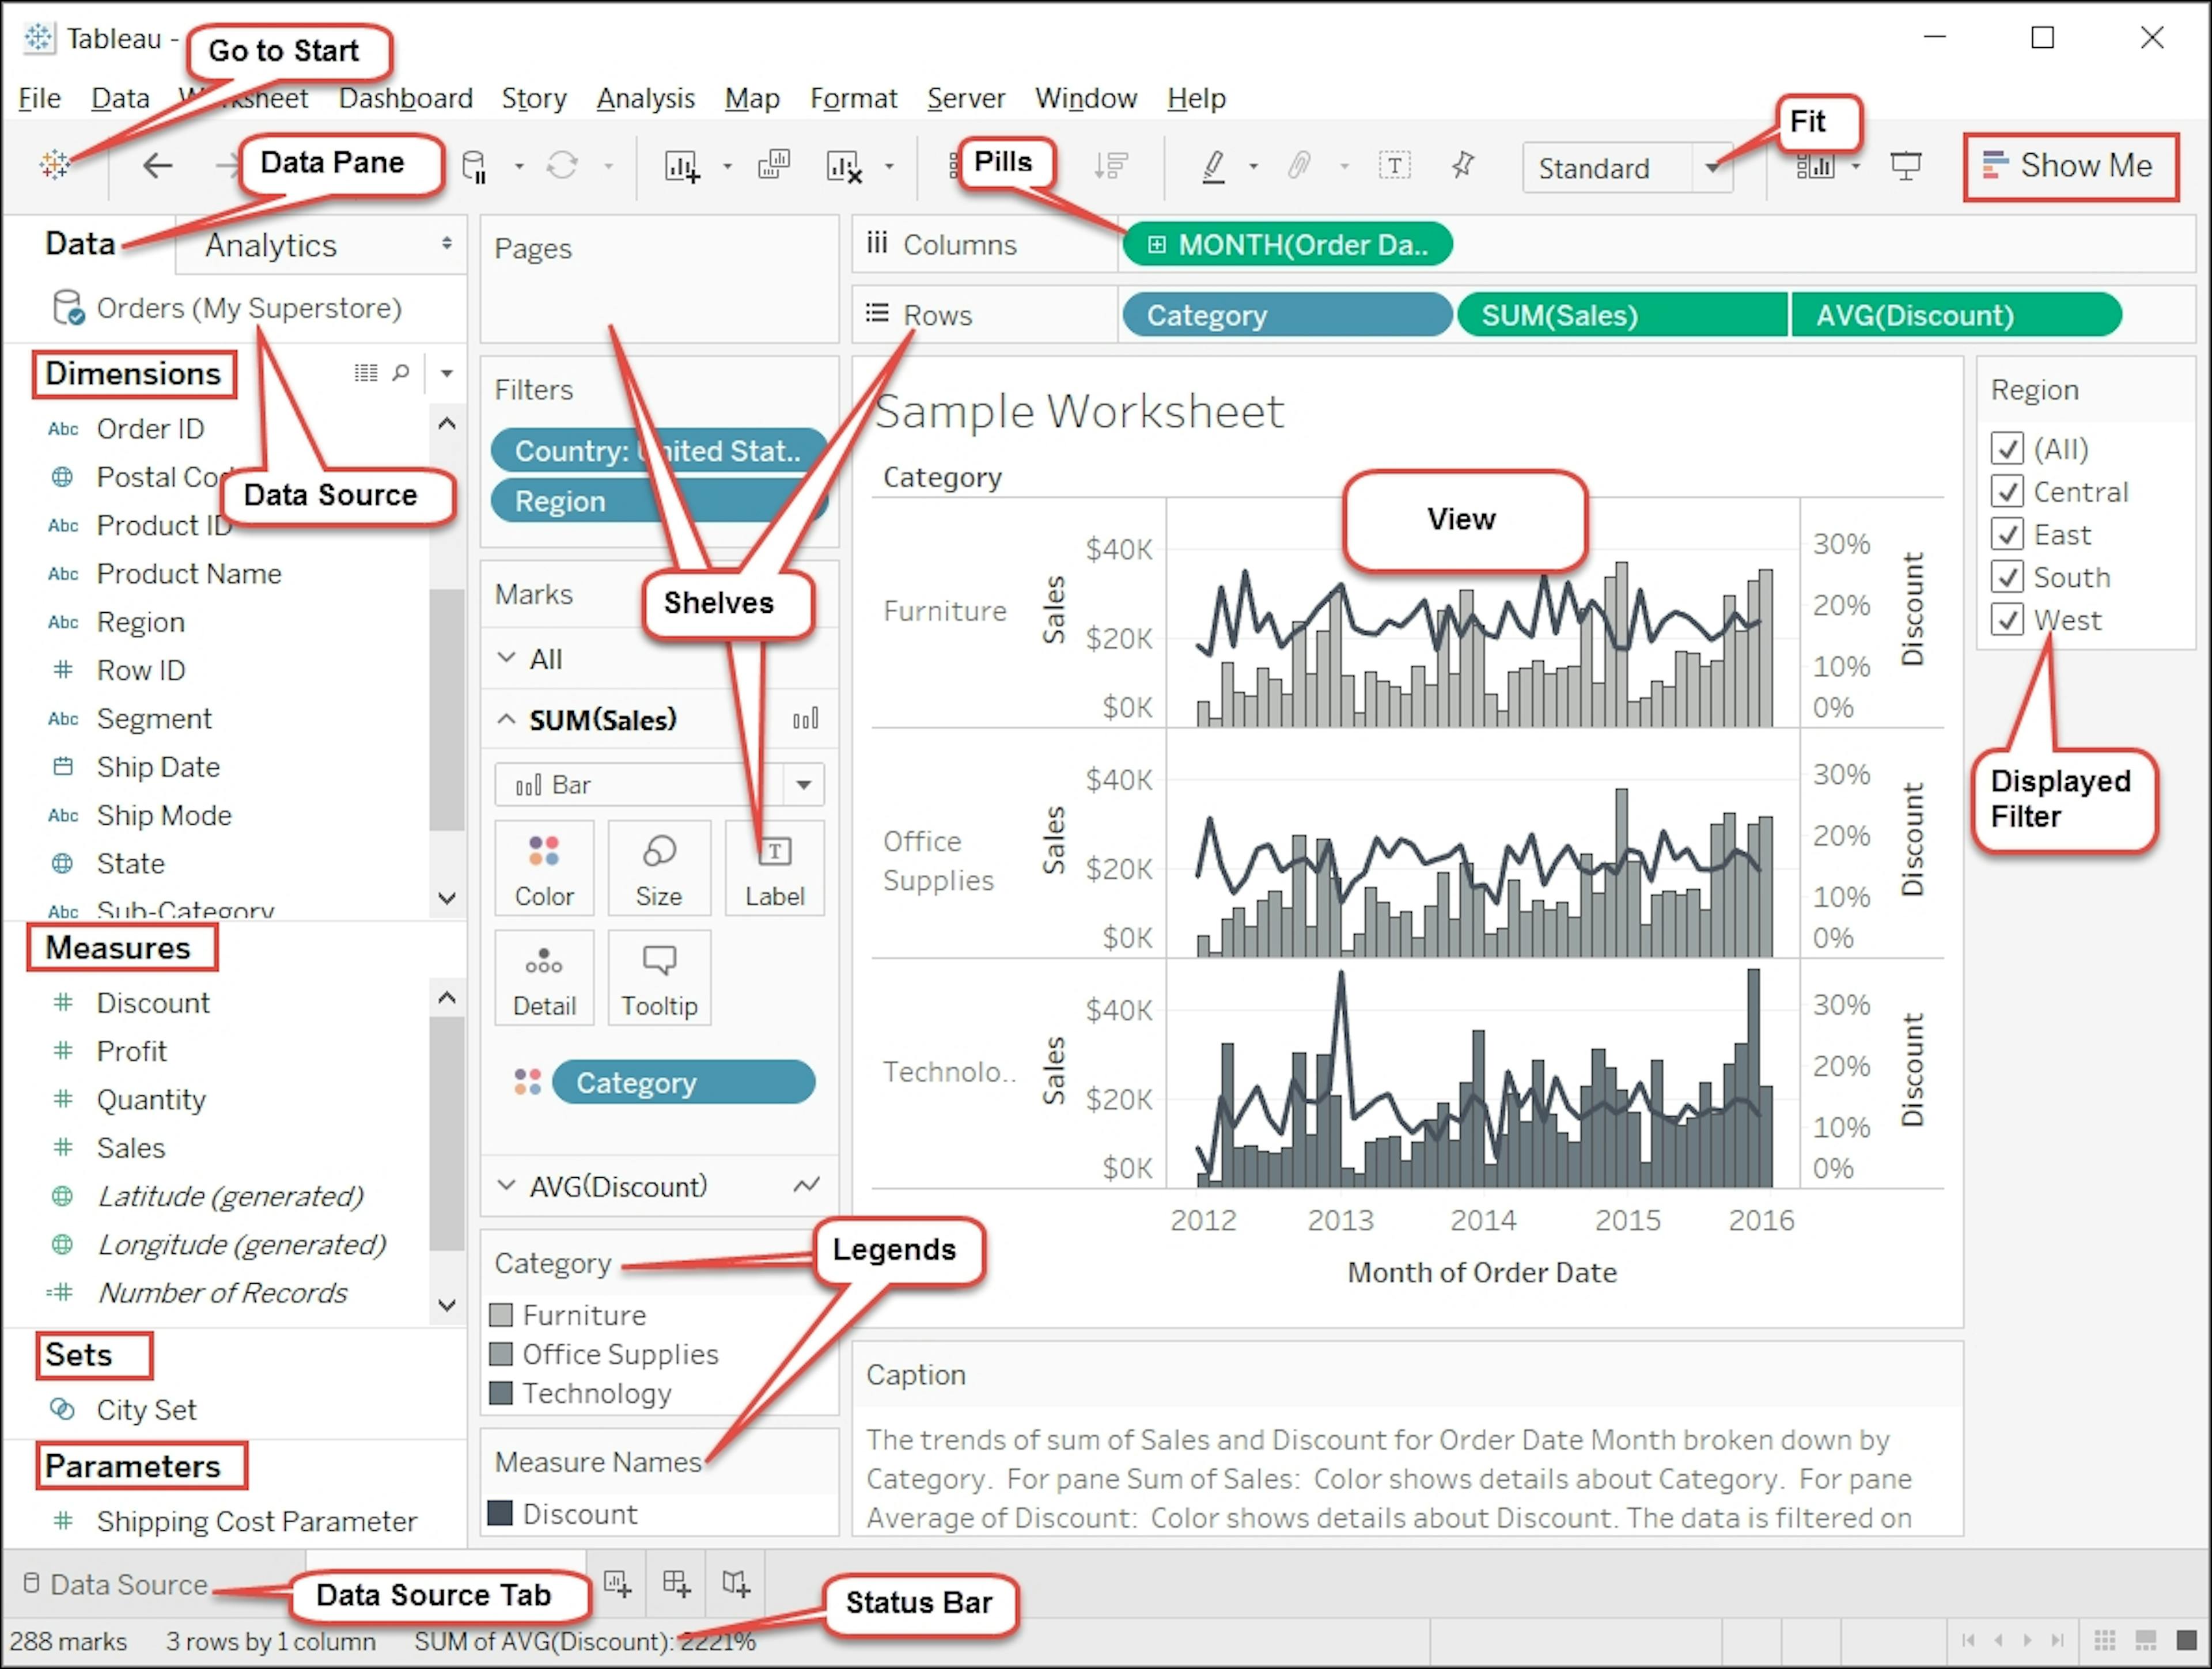 An example of Tableau interface with a direct implementation of the proximity law